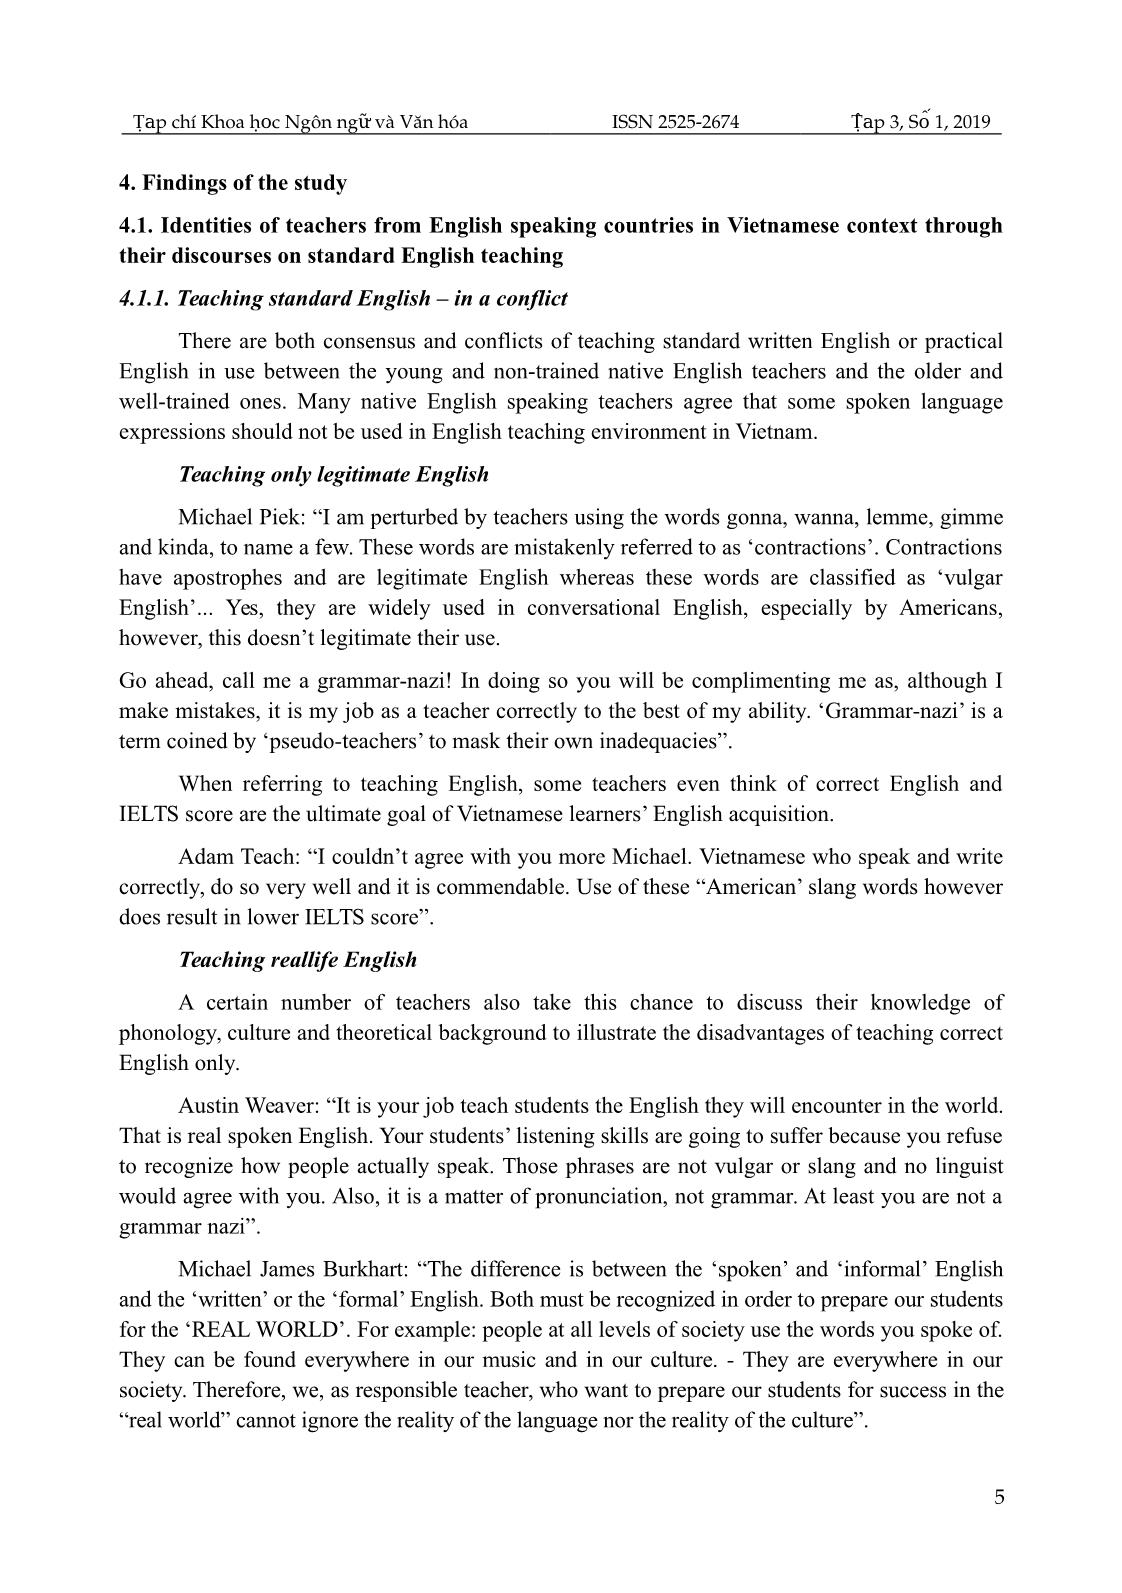 Identities of teachers from English speaking countries through discourses on teaching standard English in Vietnam trang 5